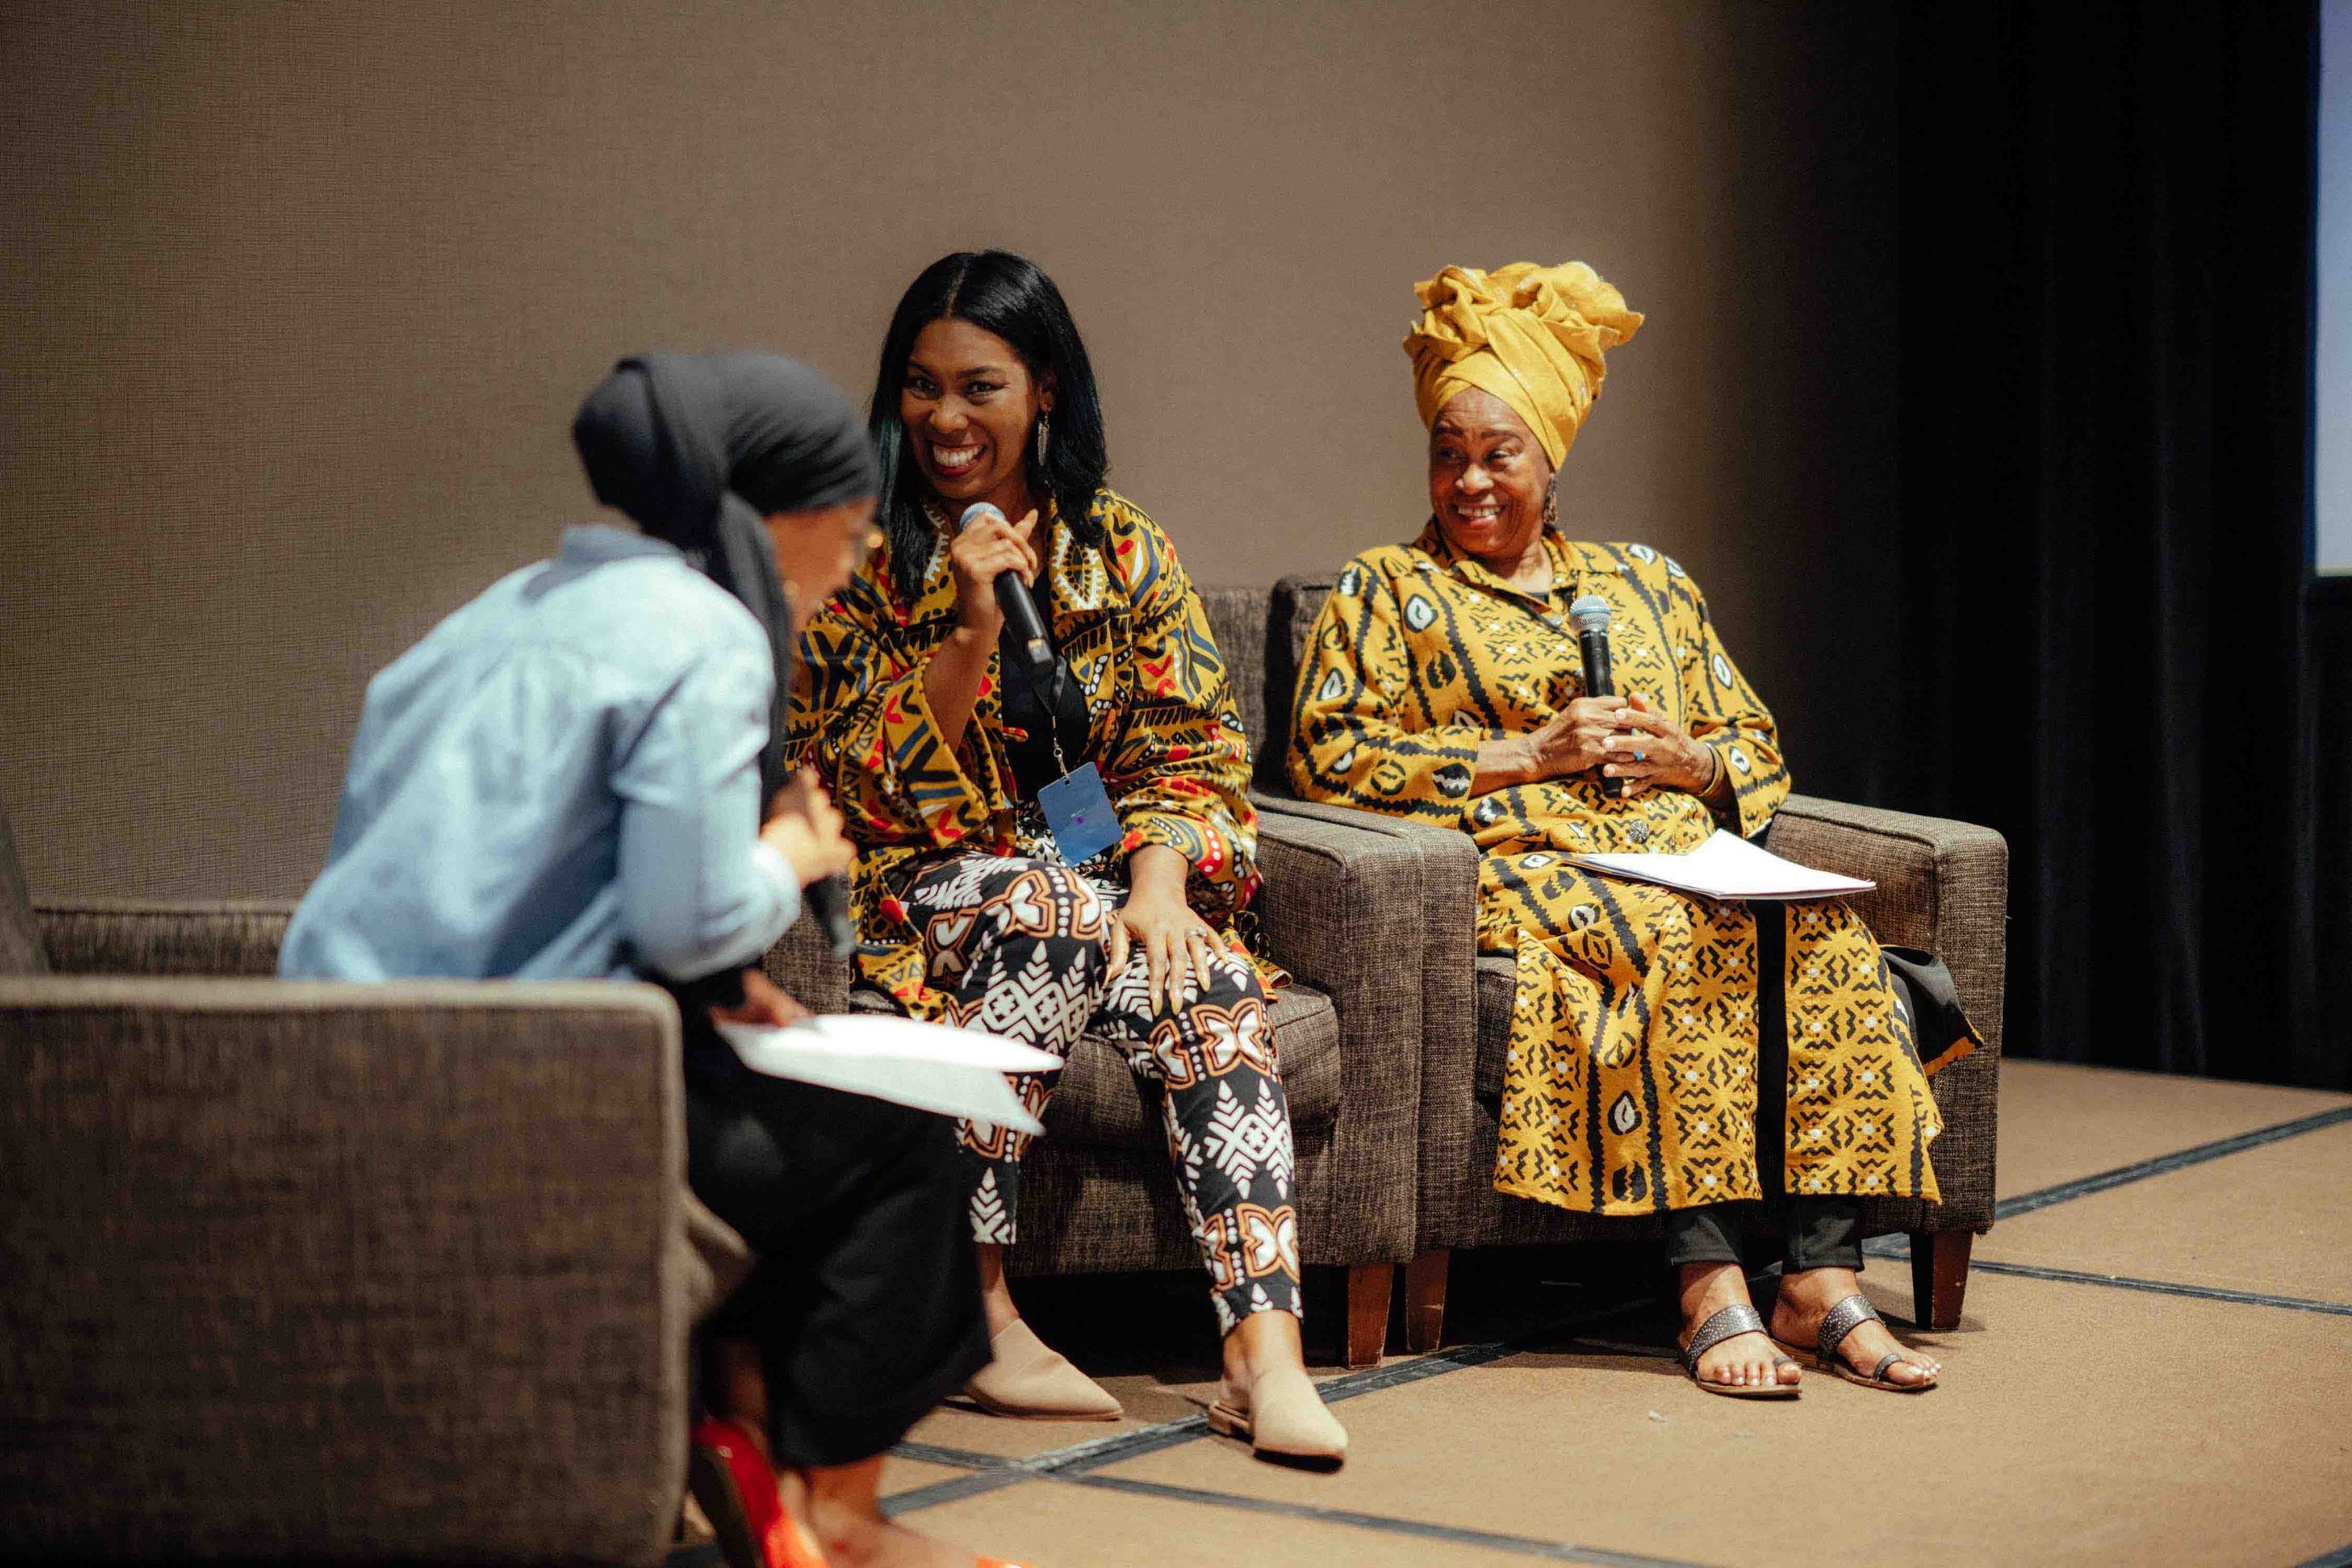 Pillars Vice President Kalia Abiade on stage with IMAN Atlanta's Aseelah Rashid and IMMC's Sister Okolo Rashid. They are all sitting in armchairs, smiling, with handheld microphones in their hands.